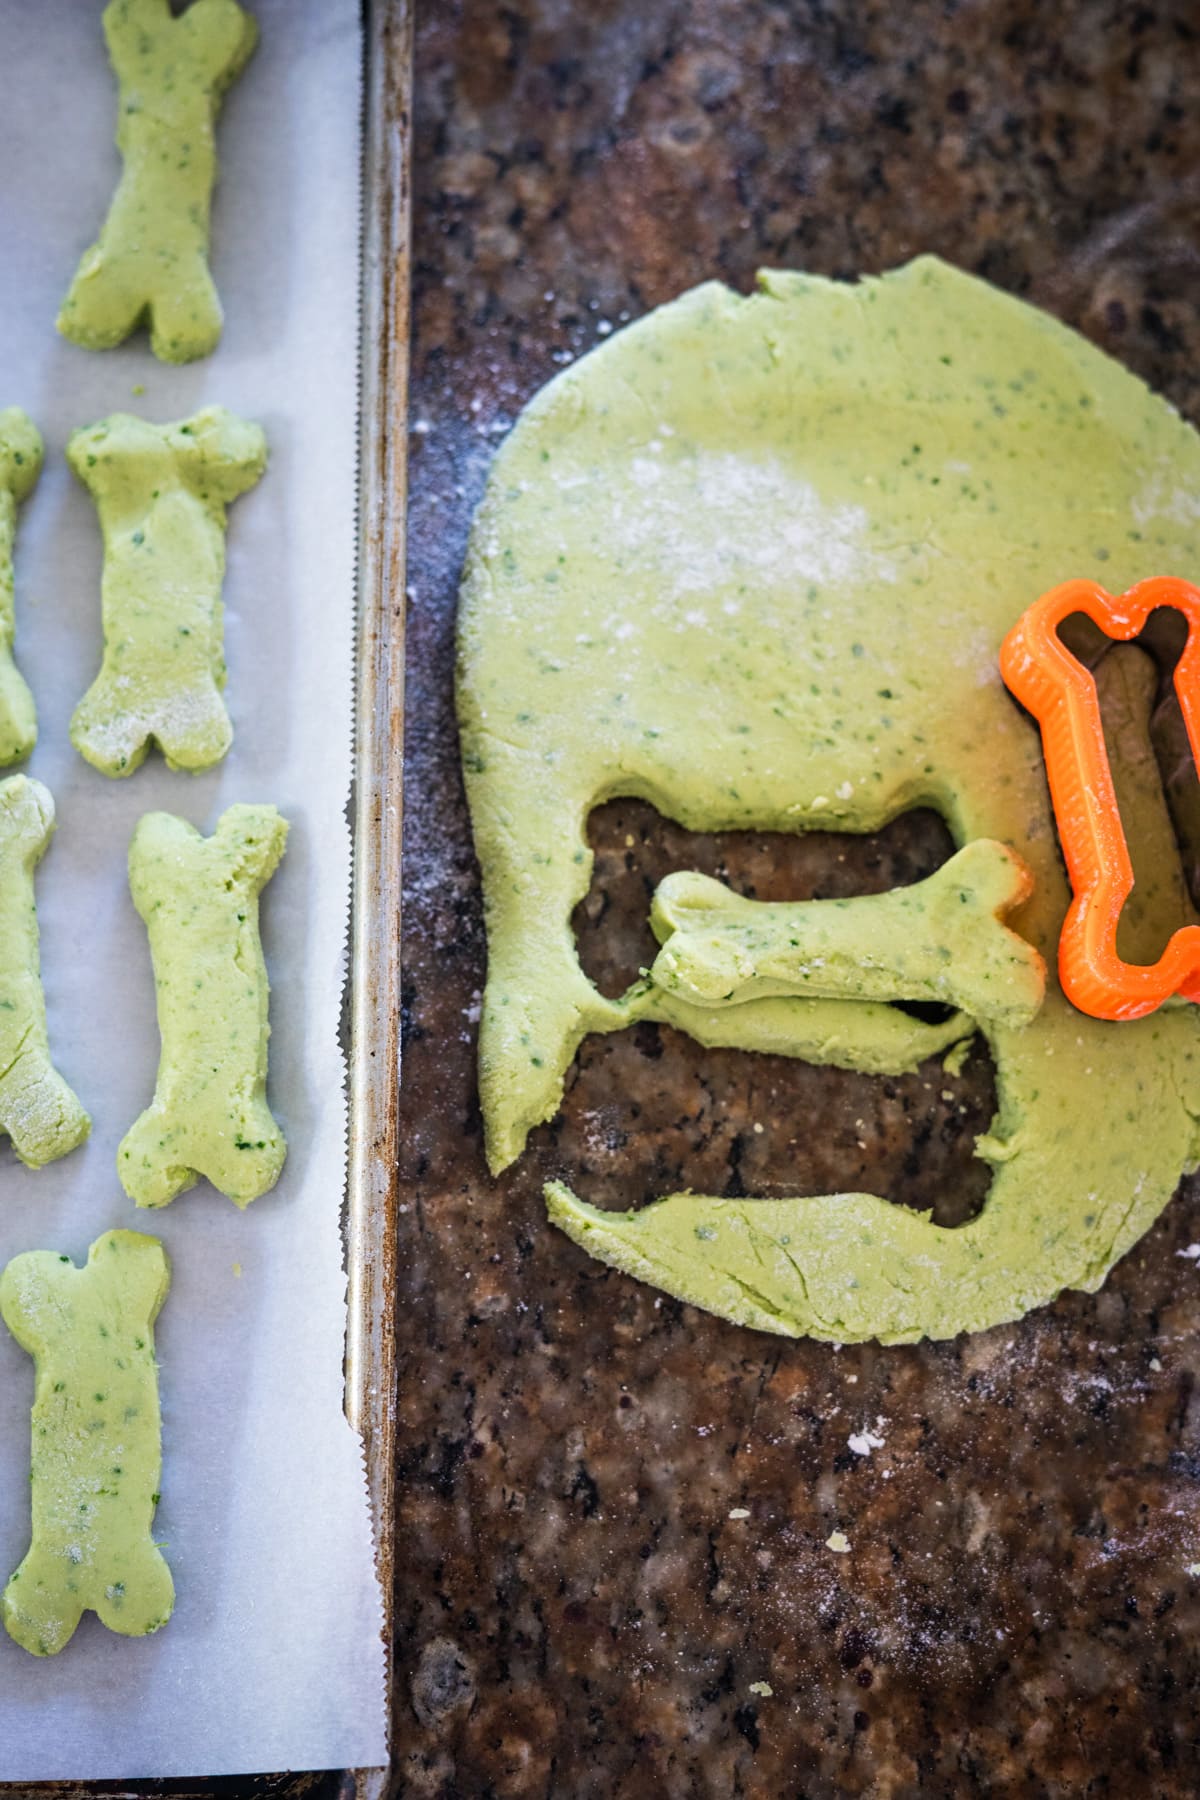 A cookie cutter is being used to make cookies with green frosting.